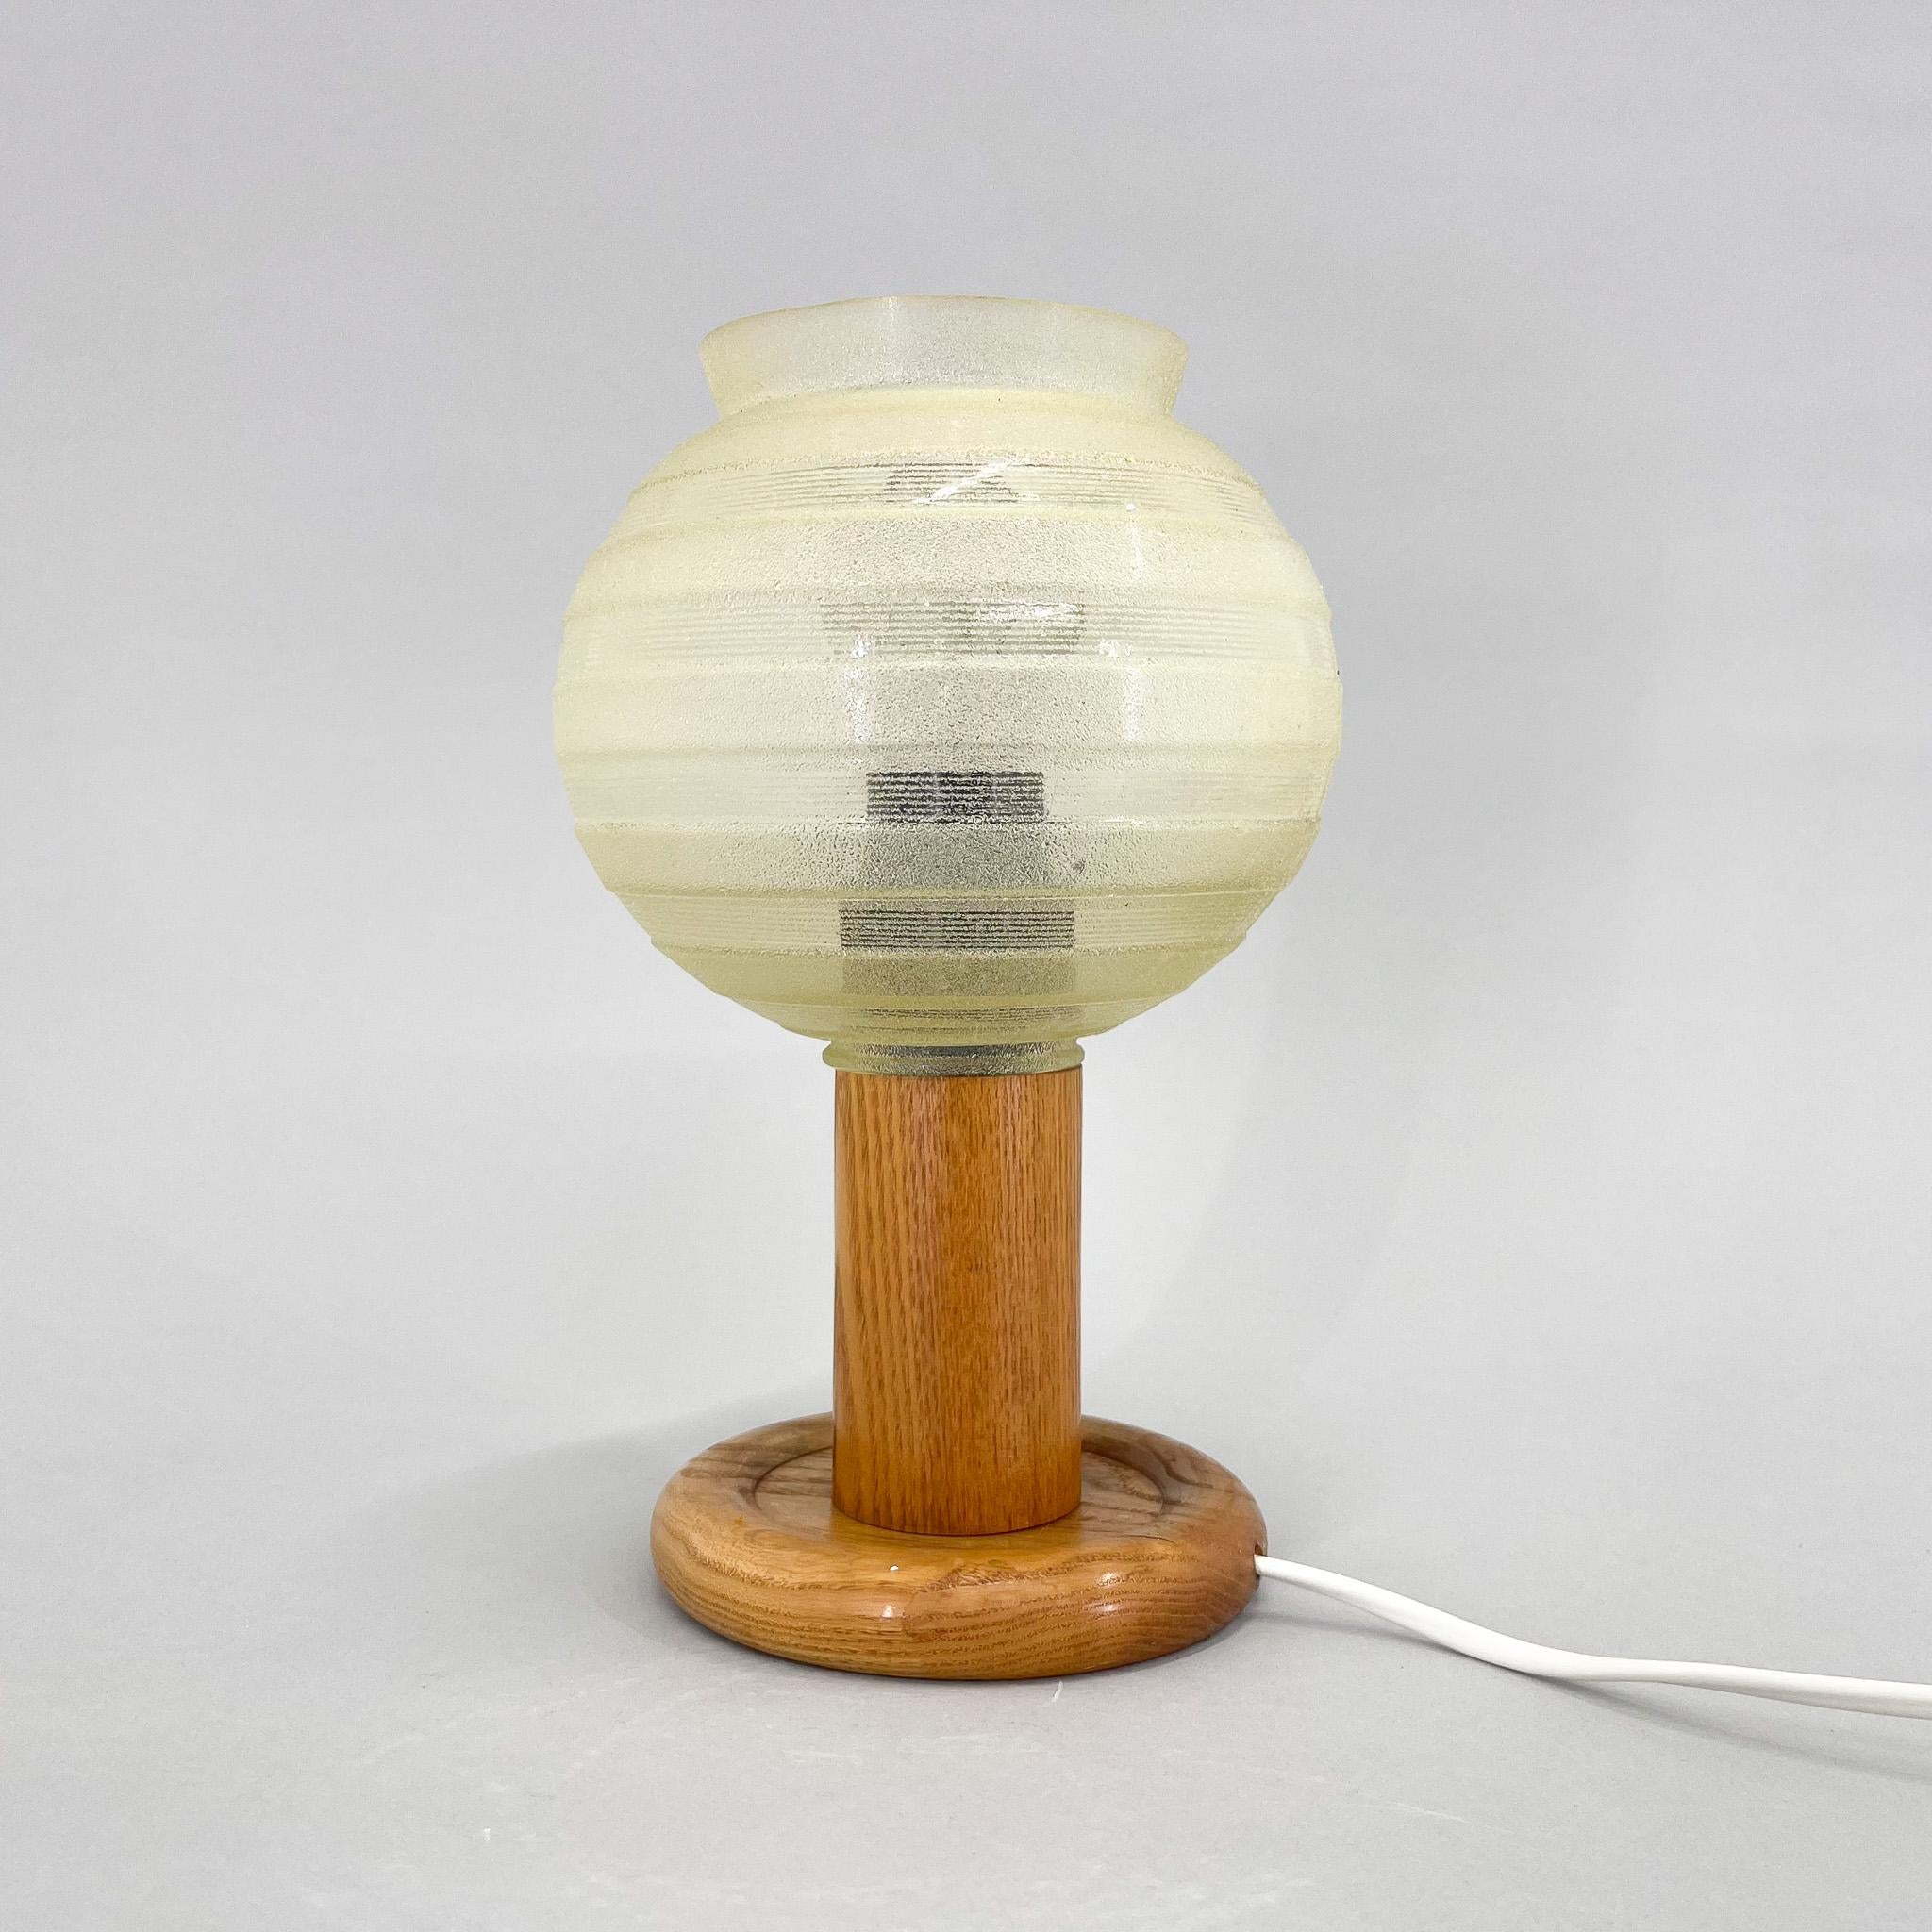 Vintage table or bedside lamp, made of wooden base and glass lamp shade. Produced in former Czechoslovakia in the 1970s. Bulb: E25-E27.